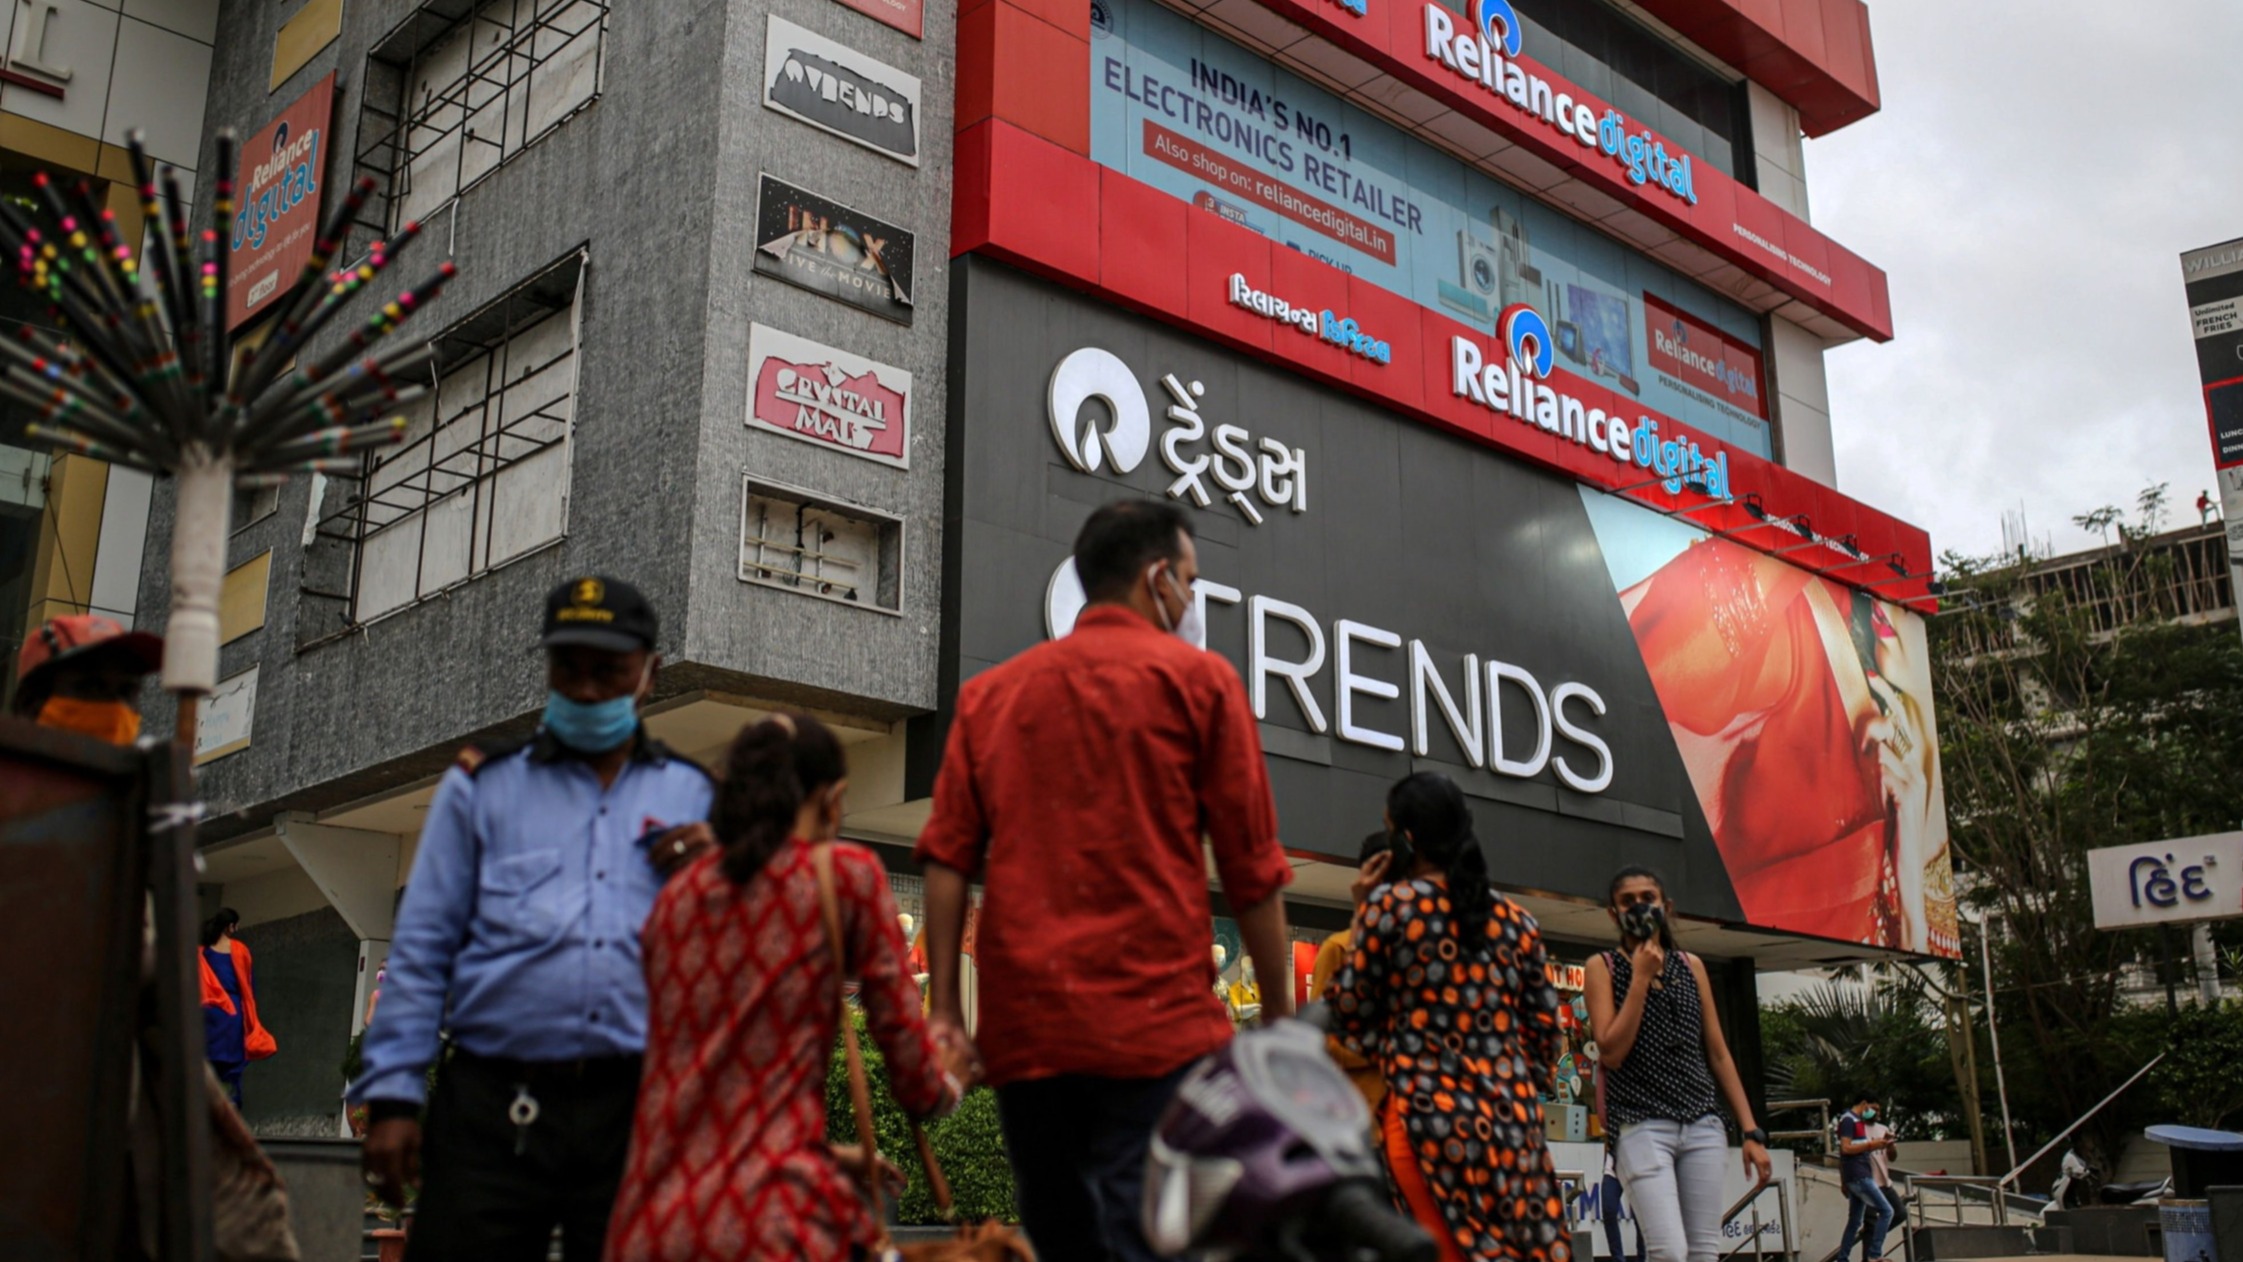 India's Reliance has ruthless Retail ambitions | Financial Times